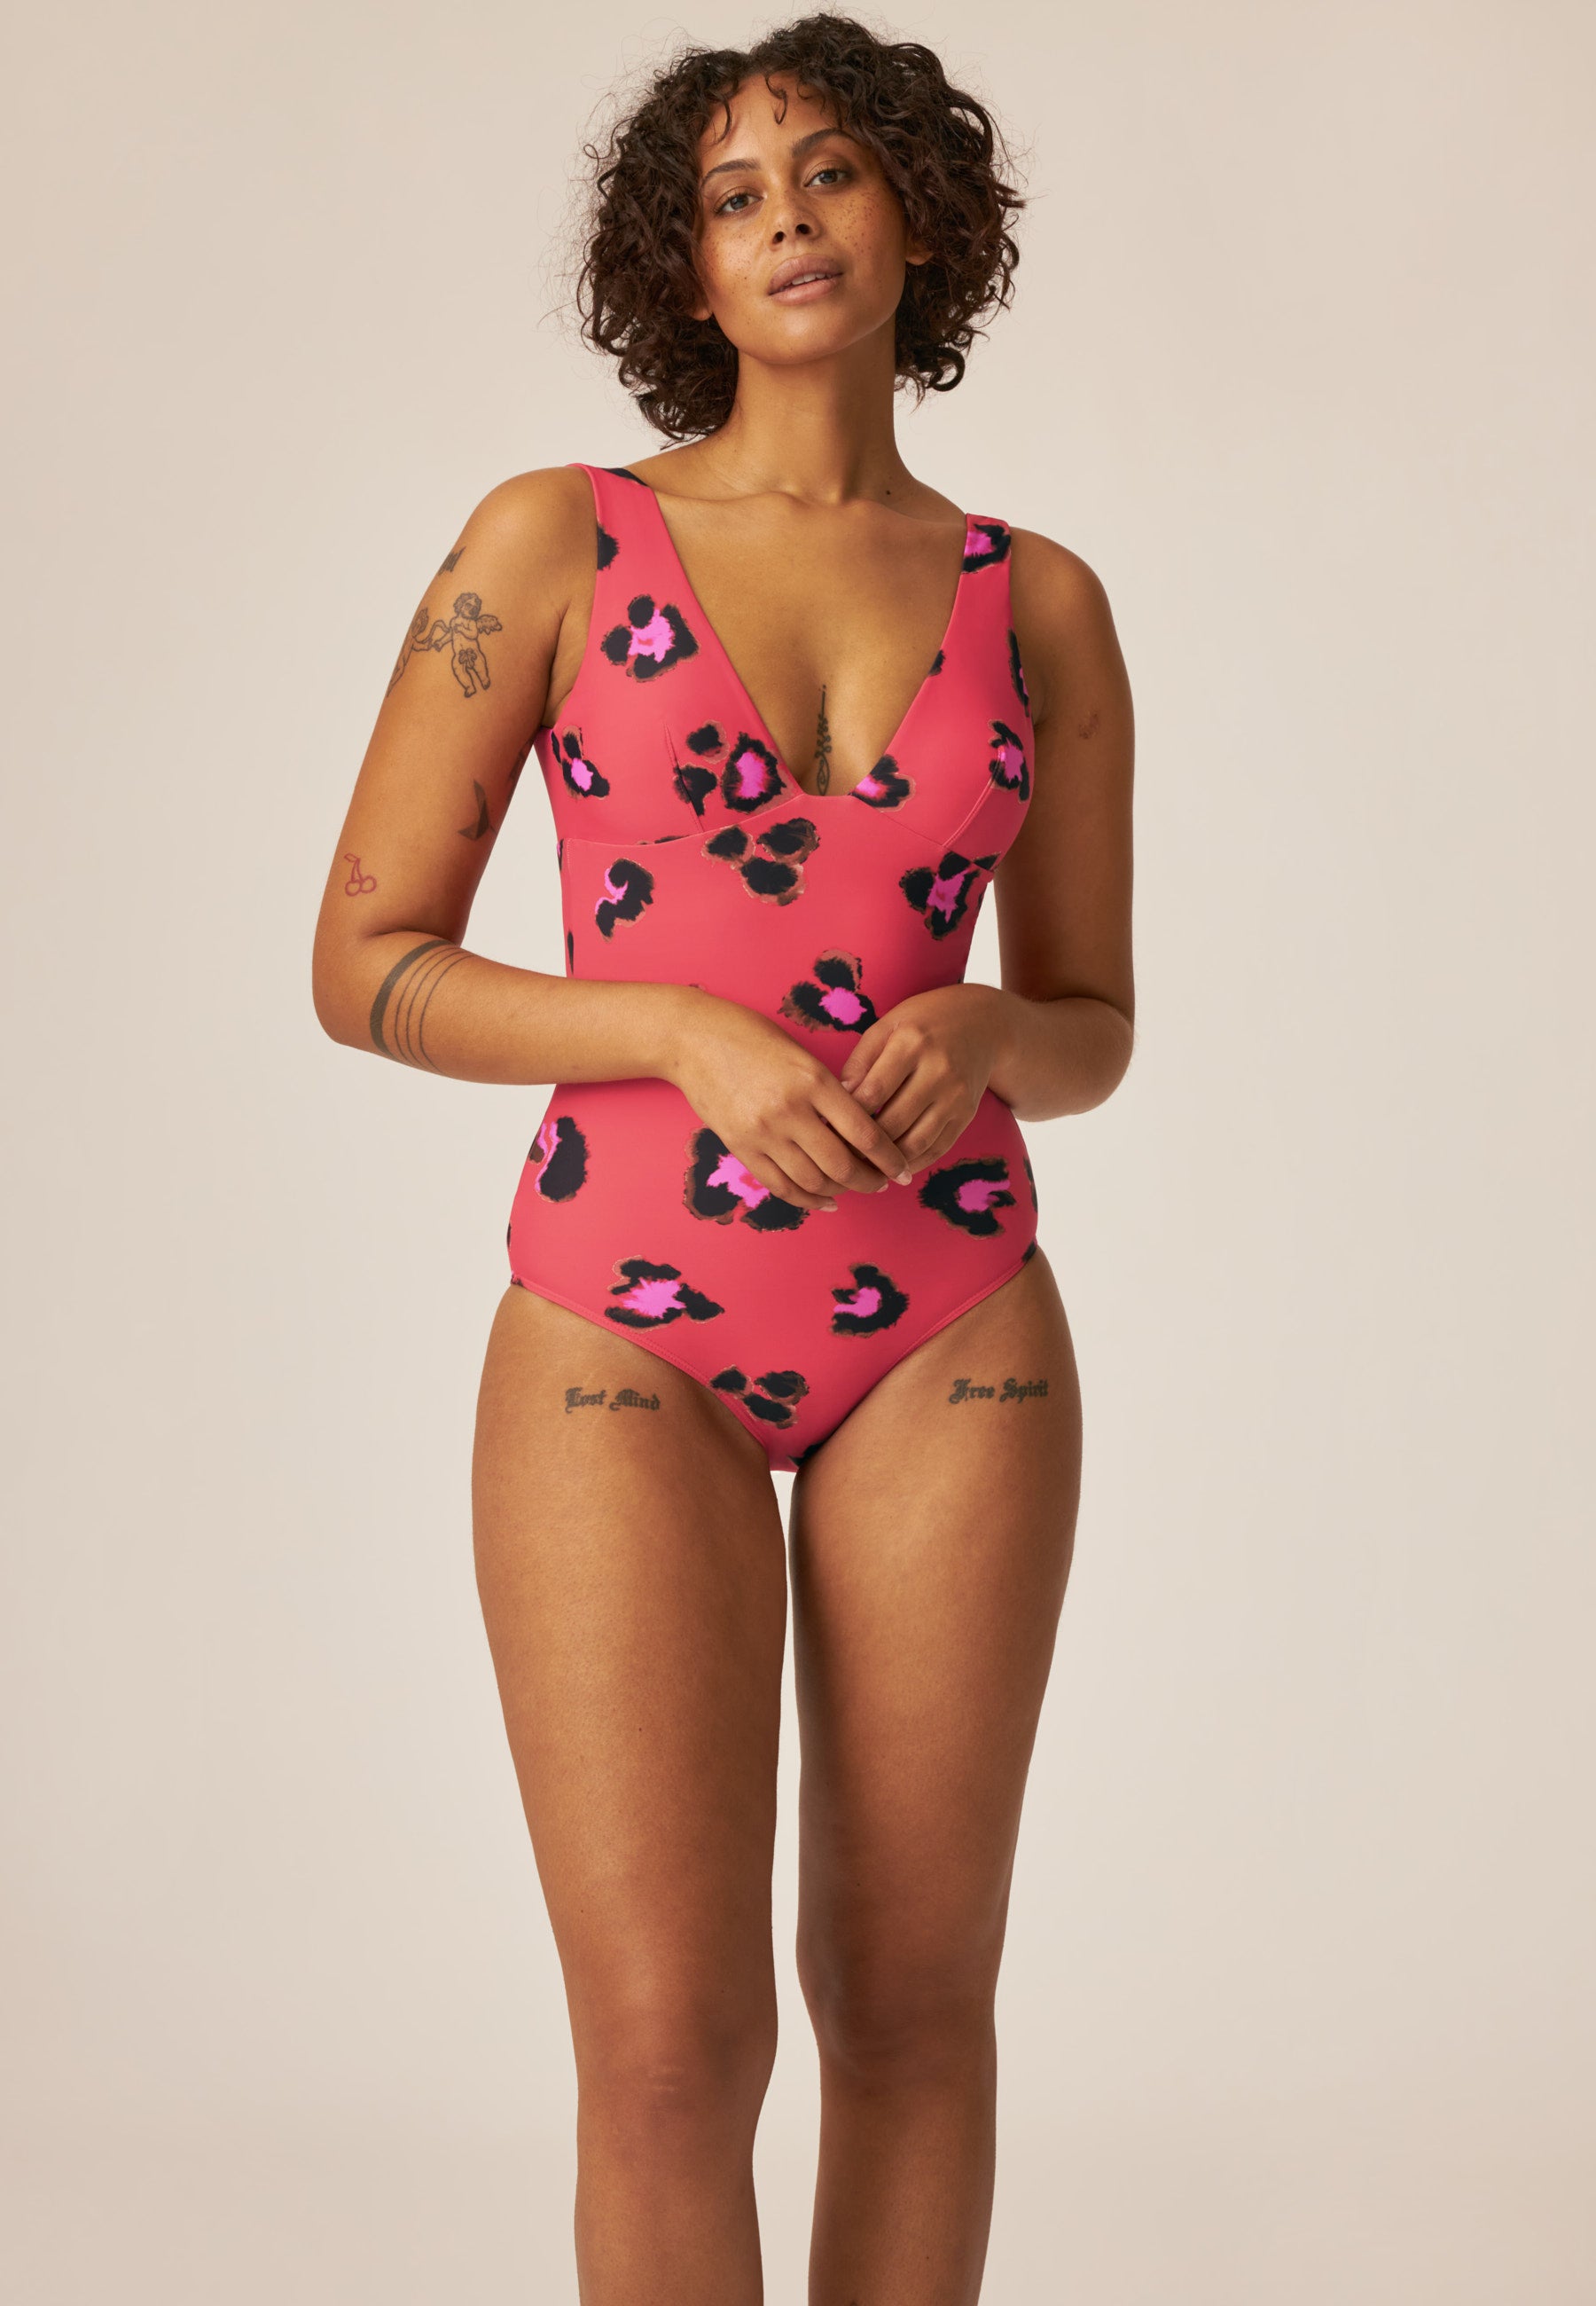 Leopard Print Swimsuit - Small Escapes / Safari Park - Red Brown Pink